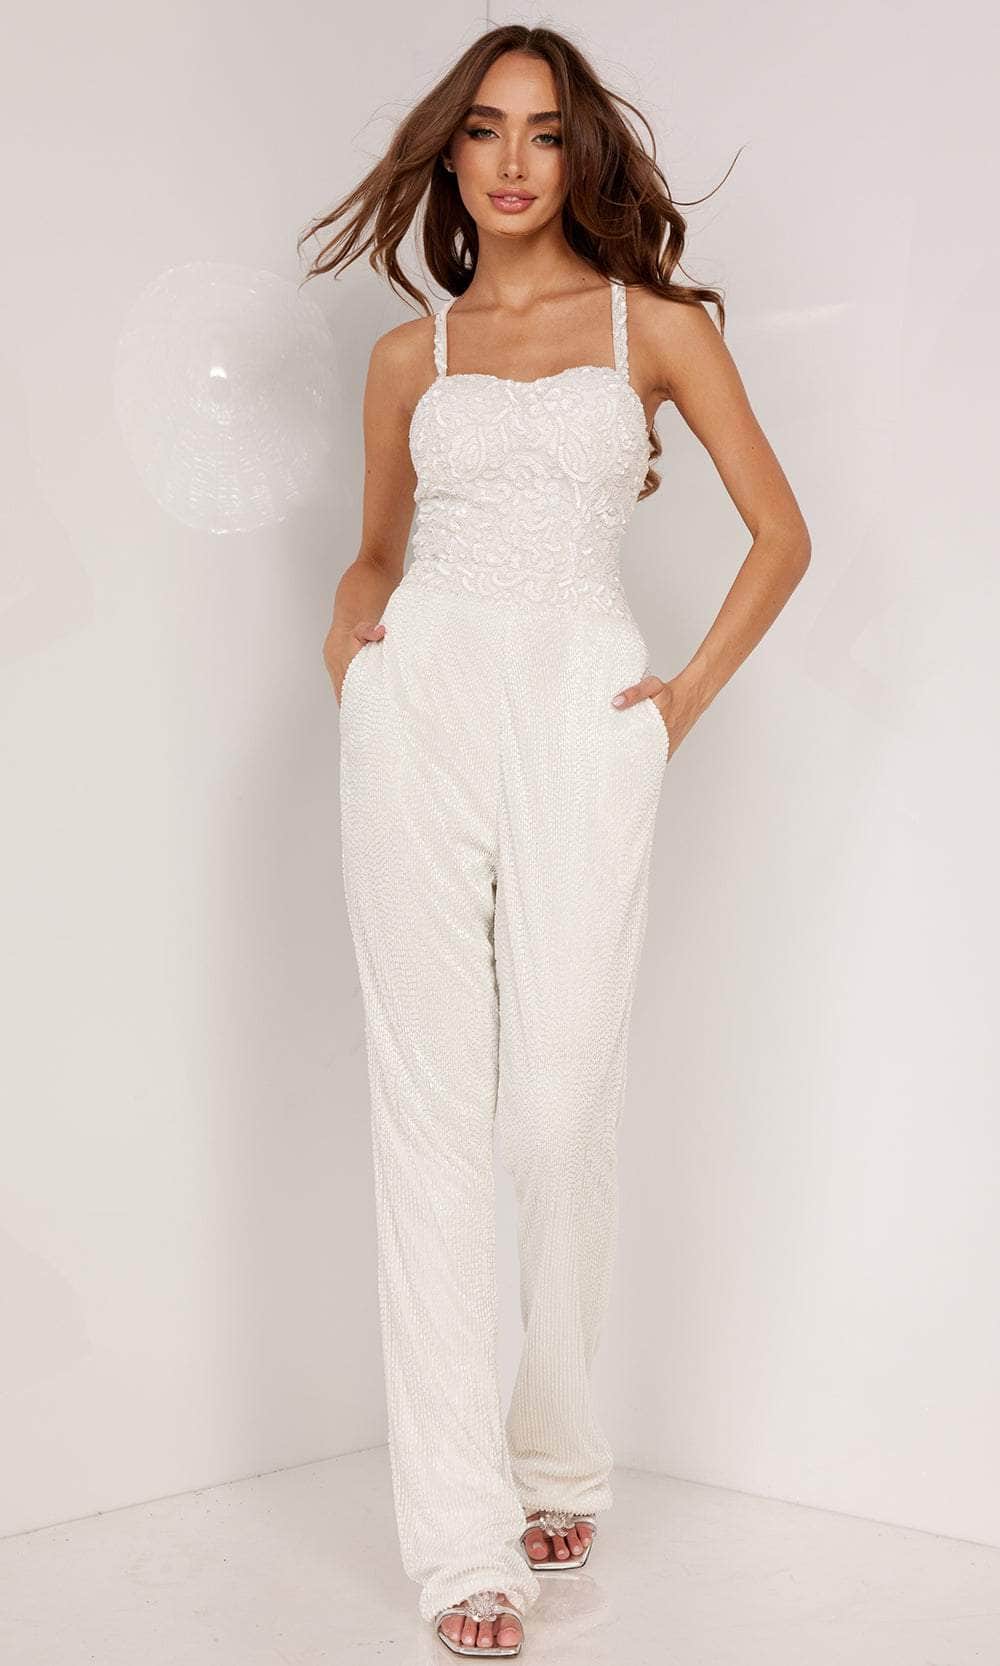 Aleta Couture 1098 - Sleeveless Embellished Jumpsuit Special Occasion Dresses 000 / Ivory